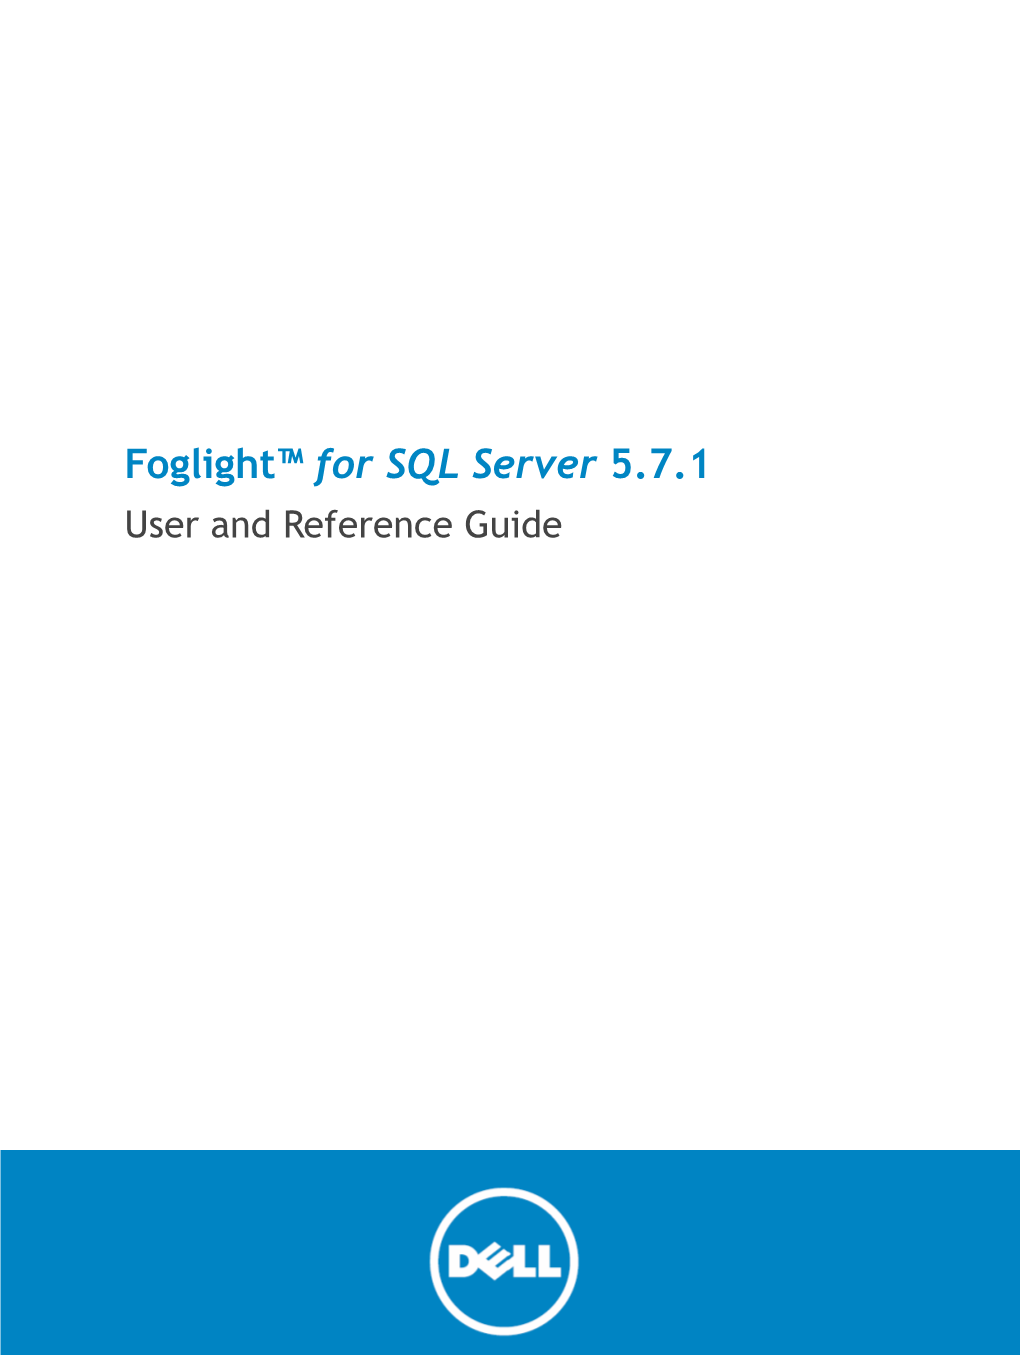 Foglight™ for SQL Server 5.7.1 User and Reference Guide © 2015 Dell Inc. ALL RIGHTS RESERVED